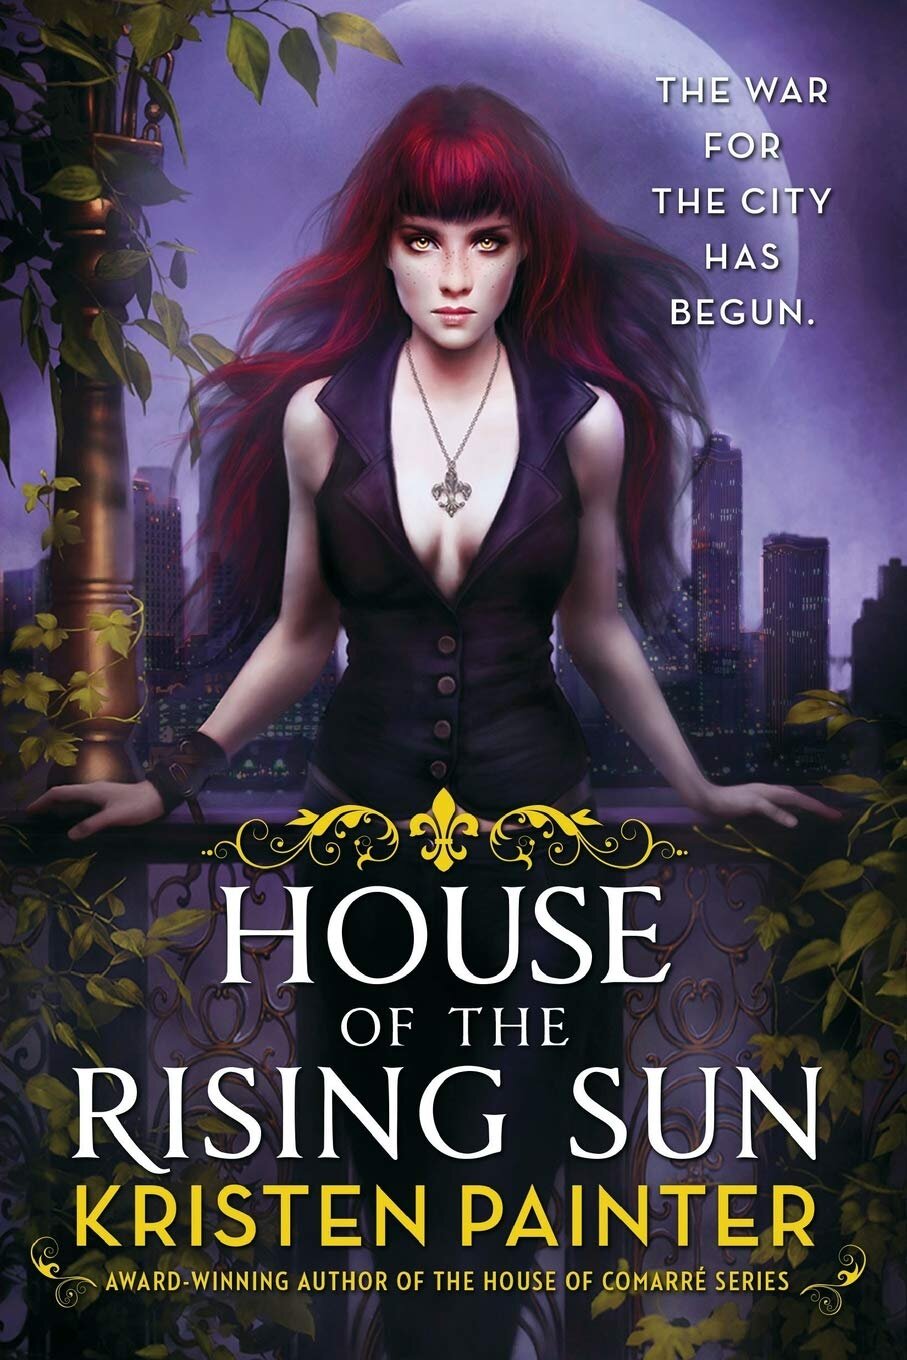 House of the Rising Sun by Kristen Painter